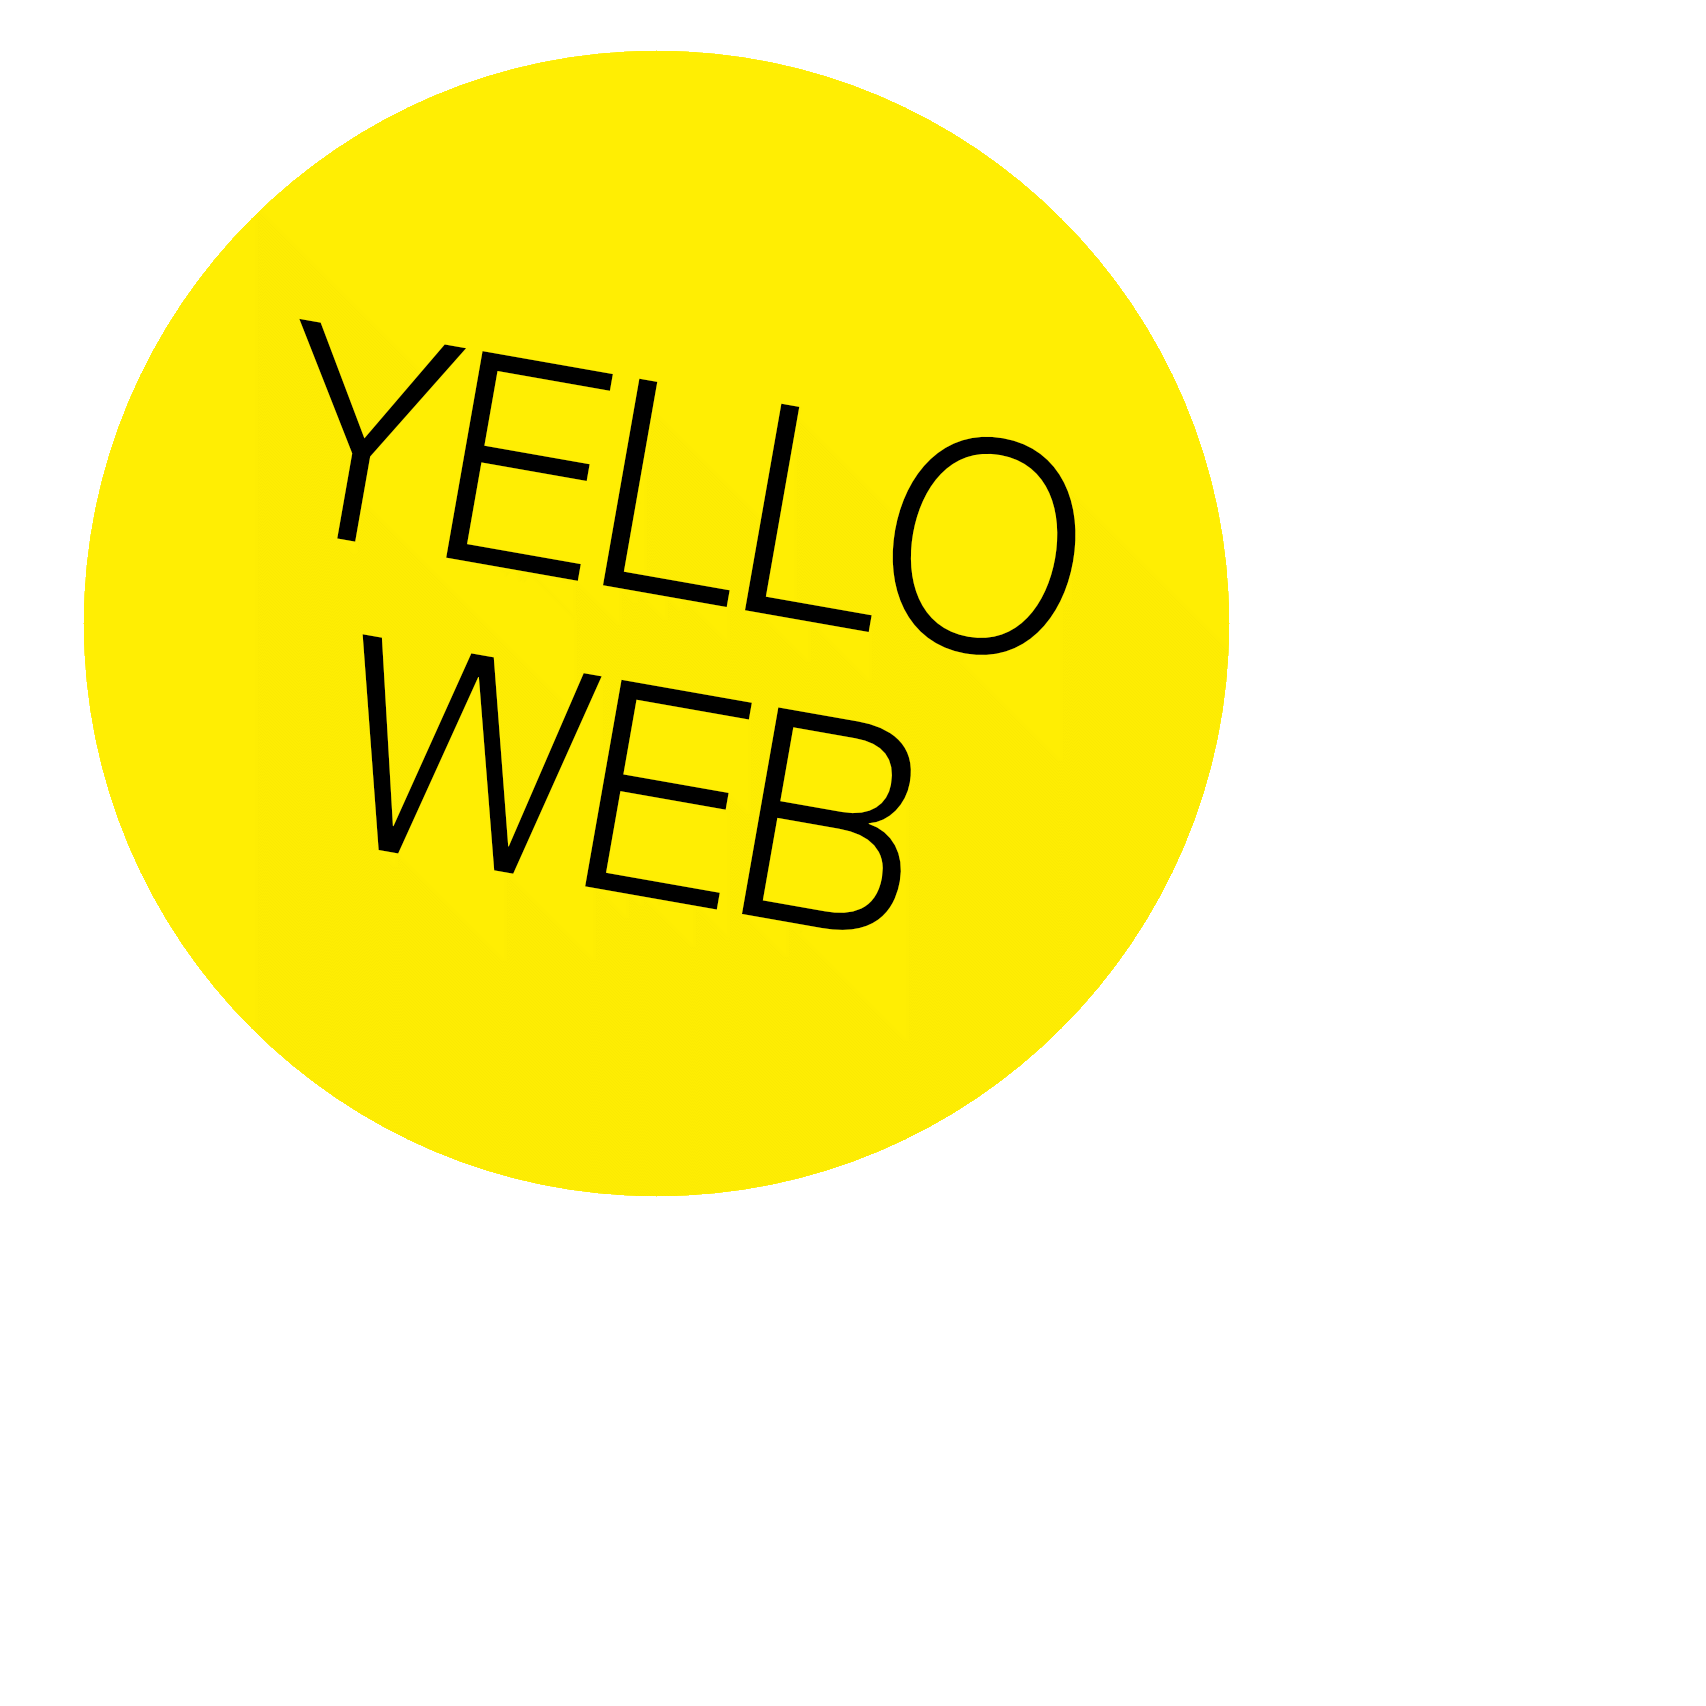 The official Yello Site